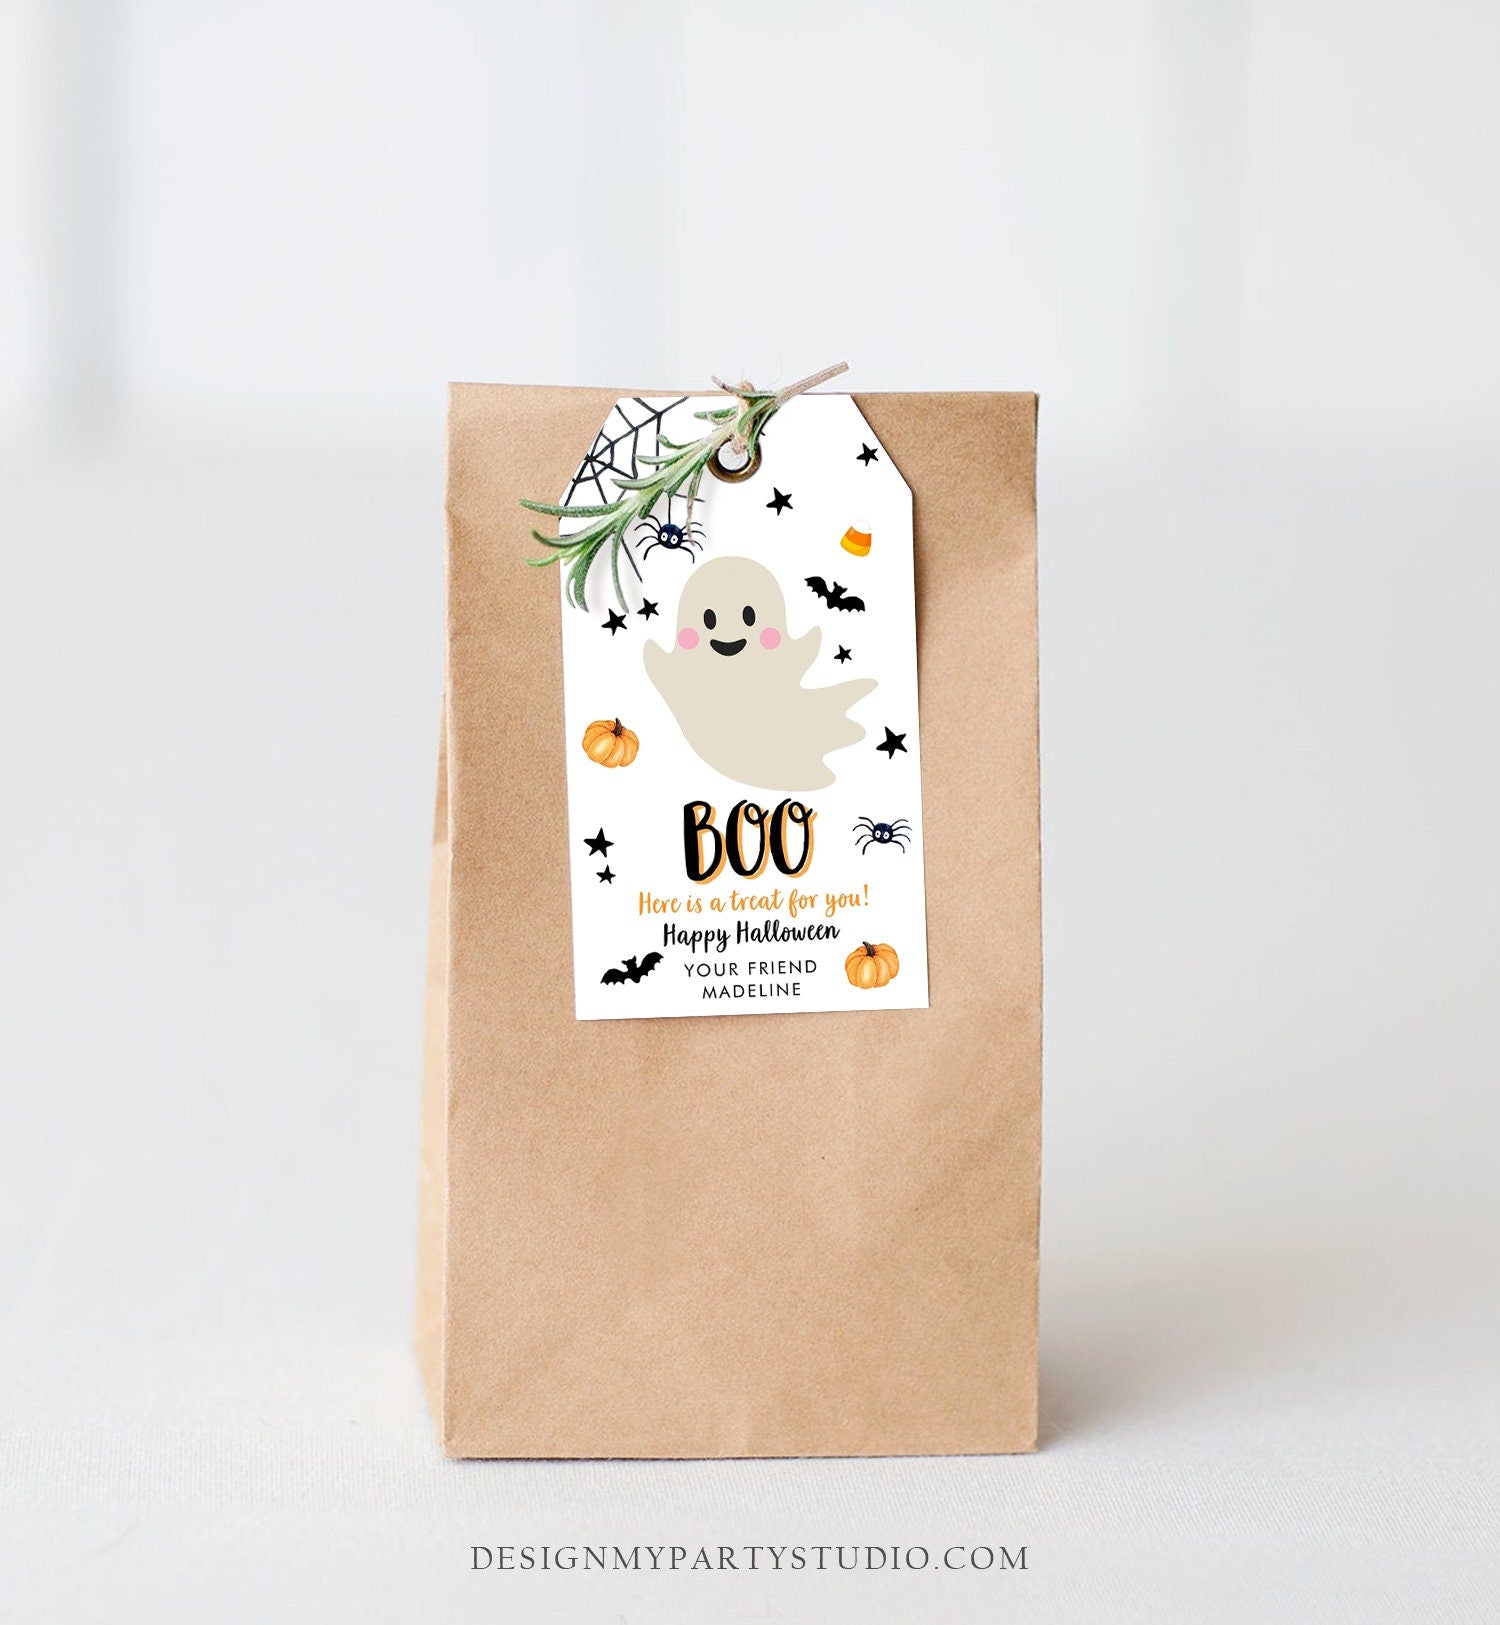 Editable Halloween Favor Tags Boo Gift Tag Costume Party Trick Or Treat Favor Tag Birthday Party Download Printable Template Corjl 0418 0261